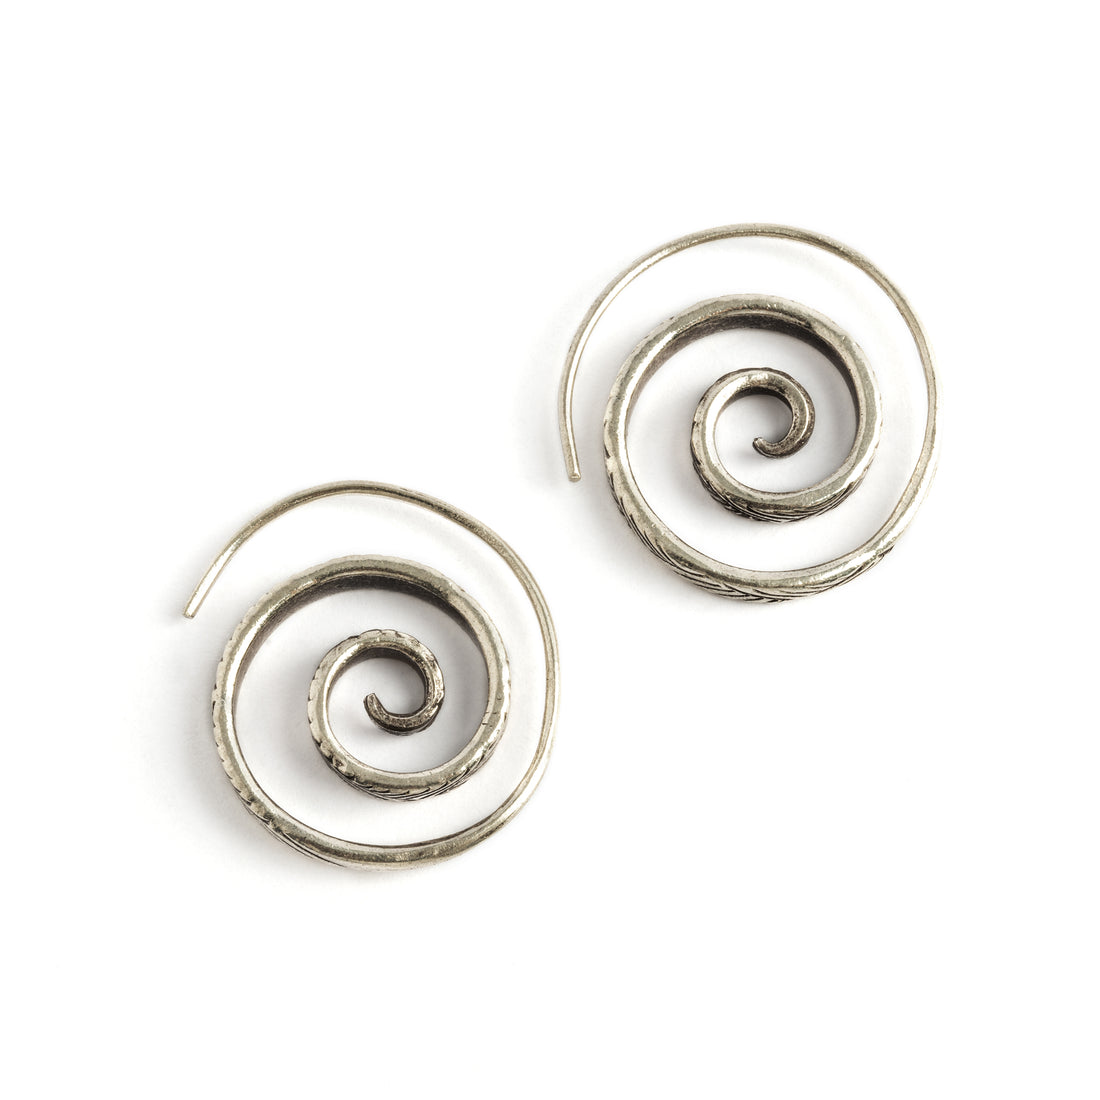 Lao Silver Spirals earrings frontal view